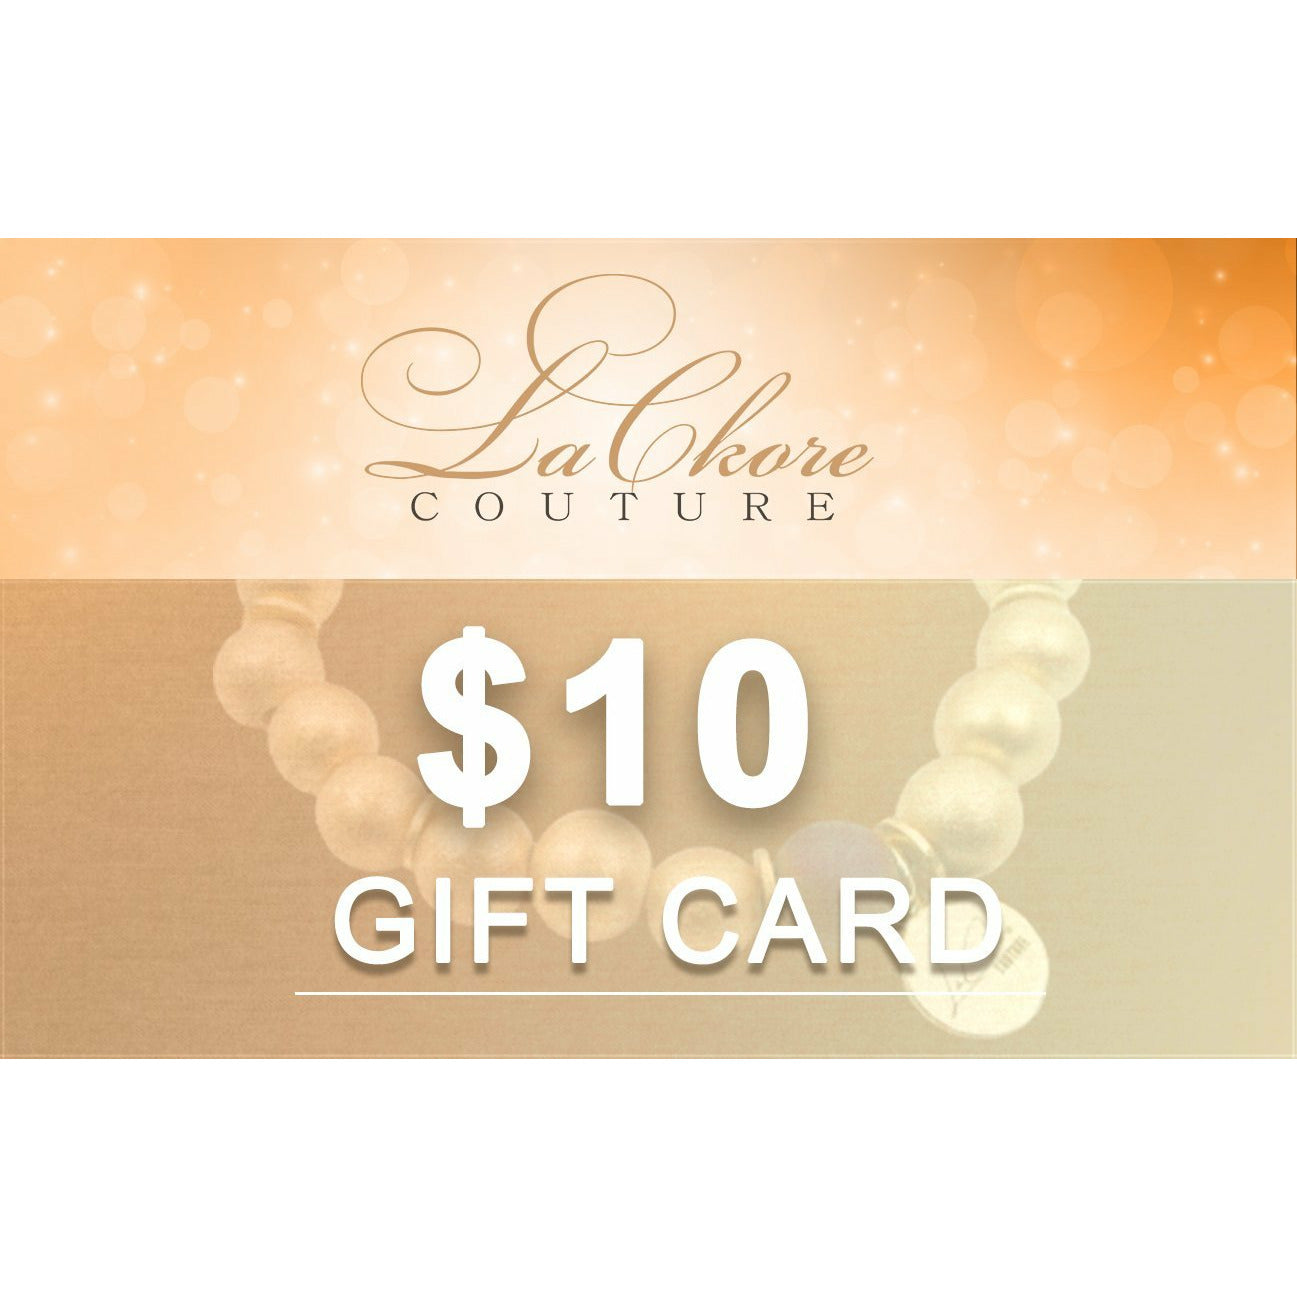 Gift Card LaCkore Couture